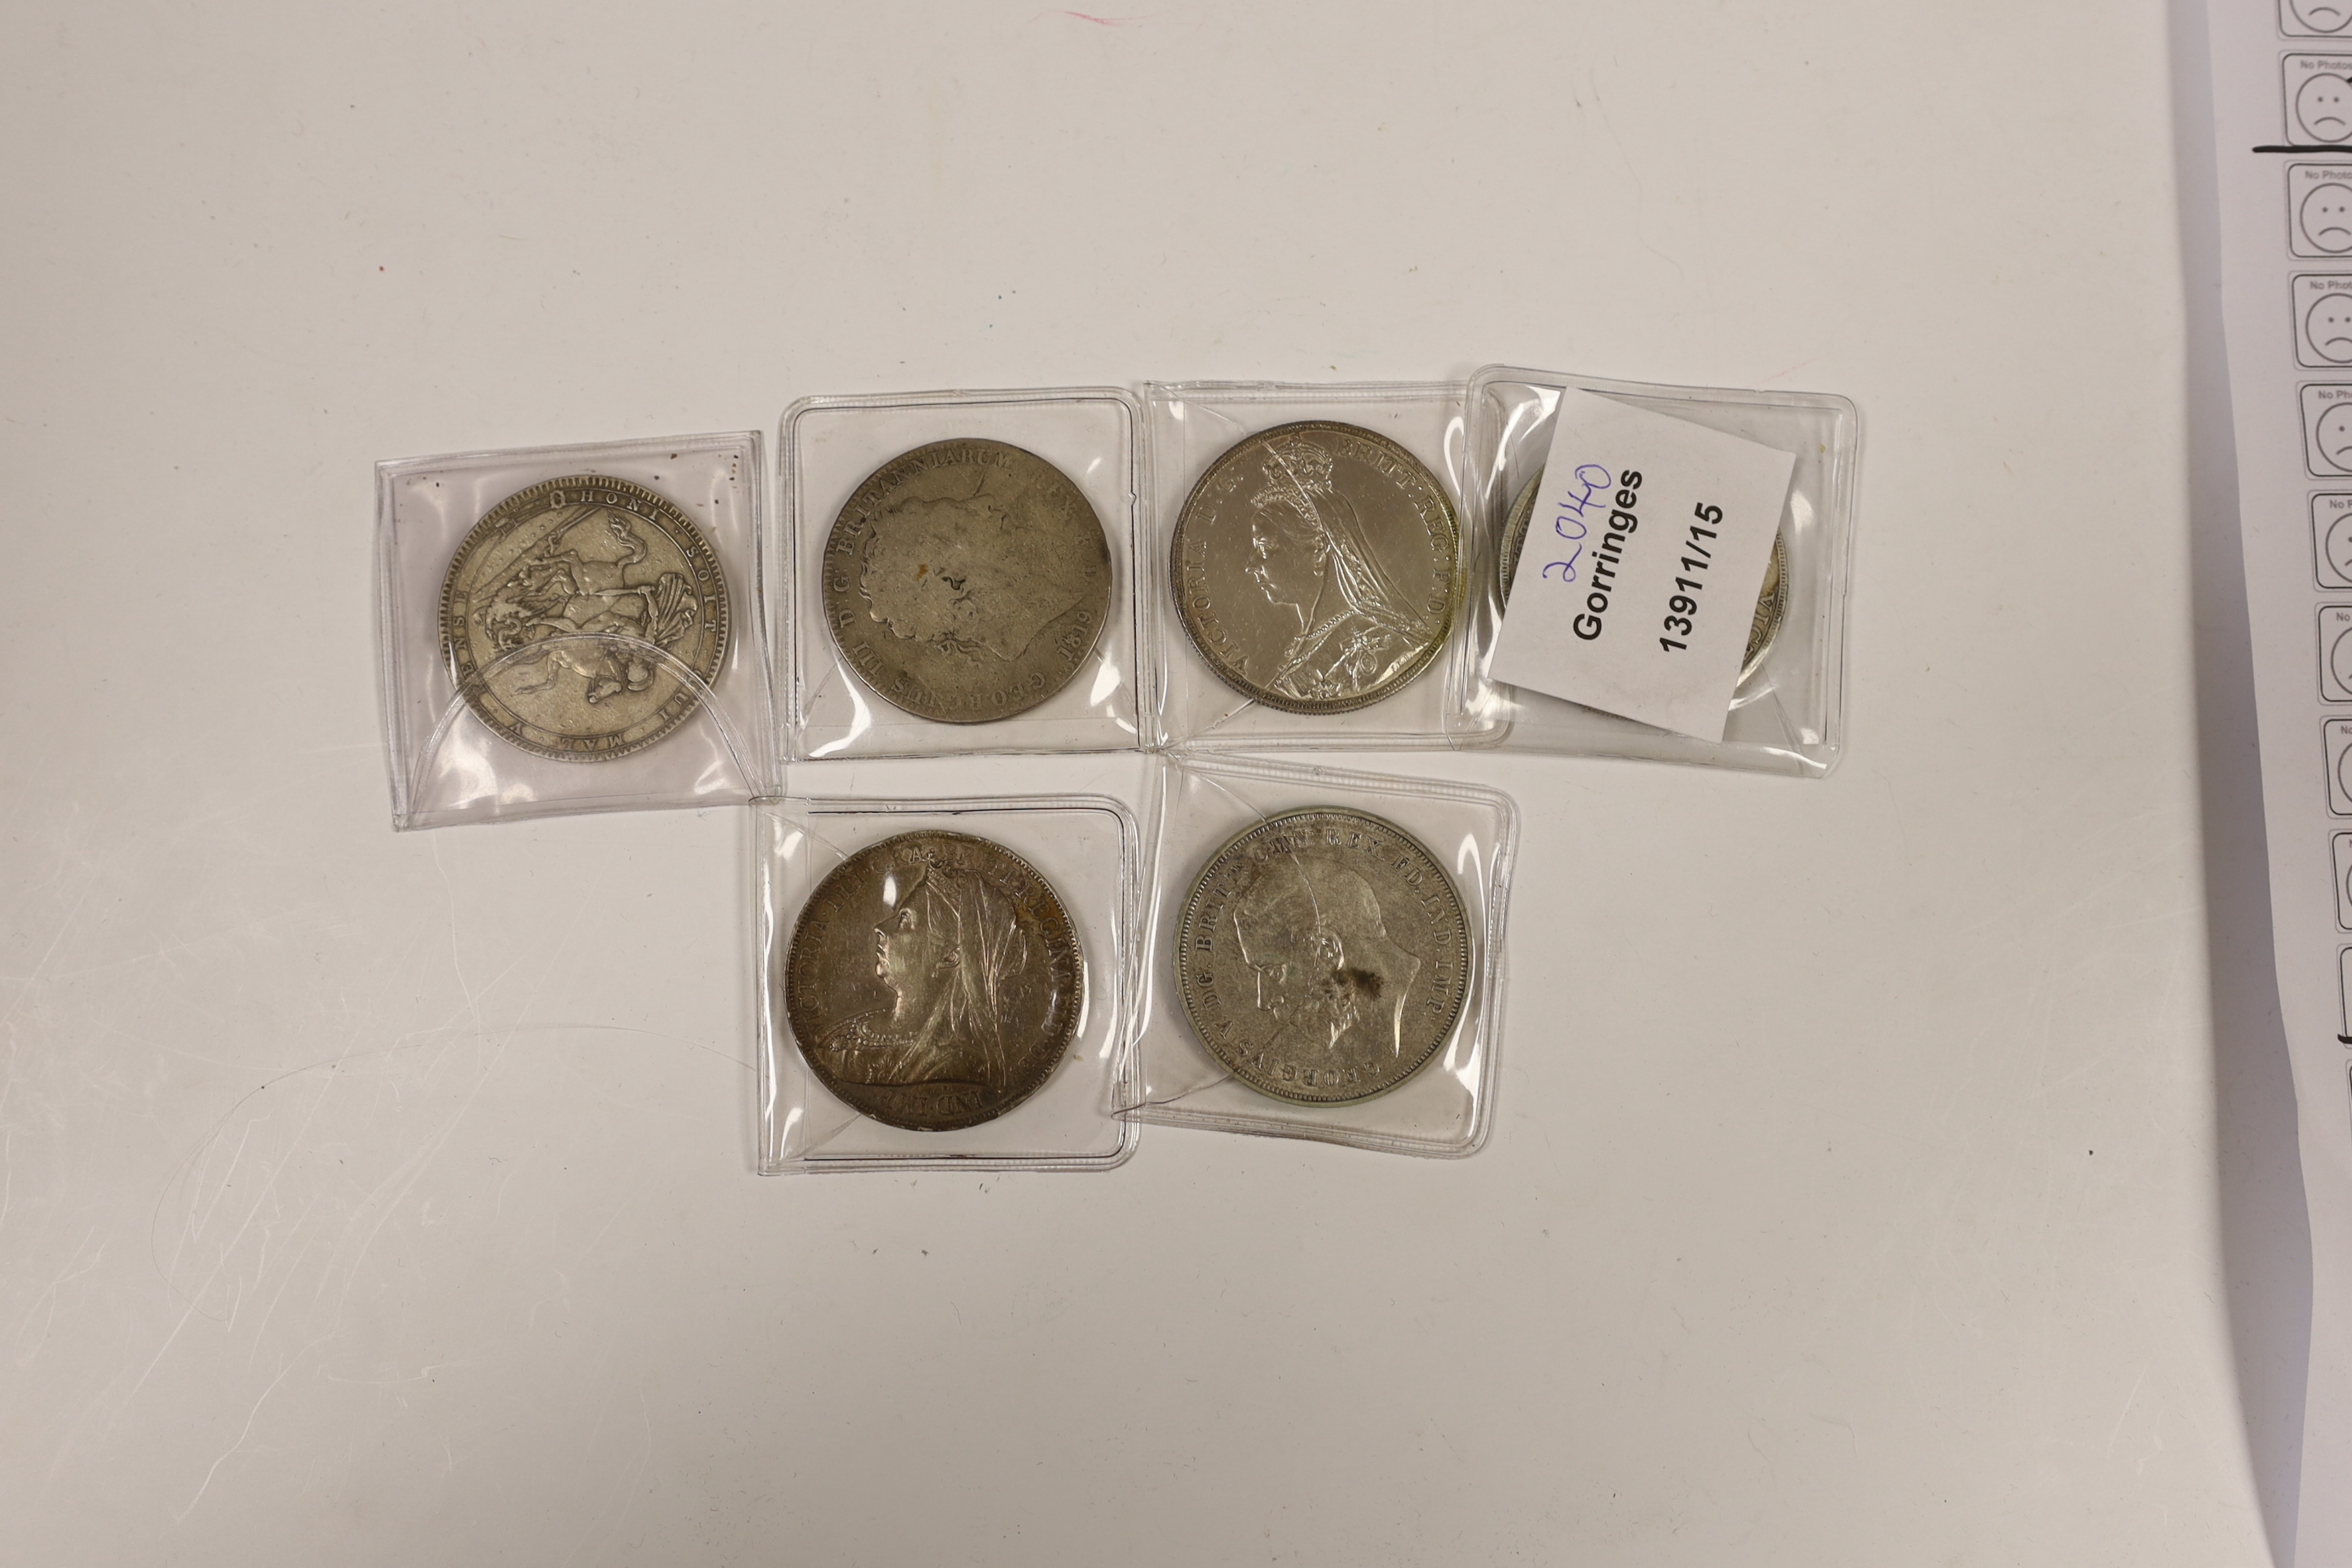 British silver crowns, George III 1820, Fine or better, 1819, Victoria 1889, good VF, 1891, 1900, VF and George V 1935